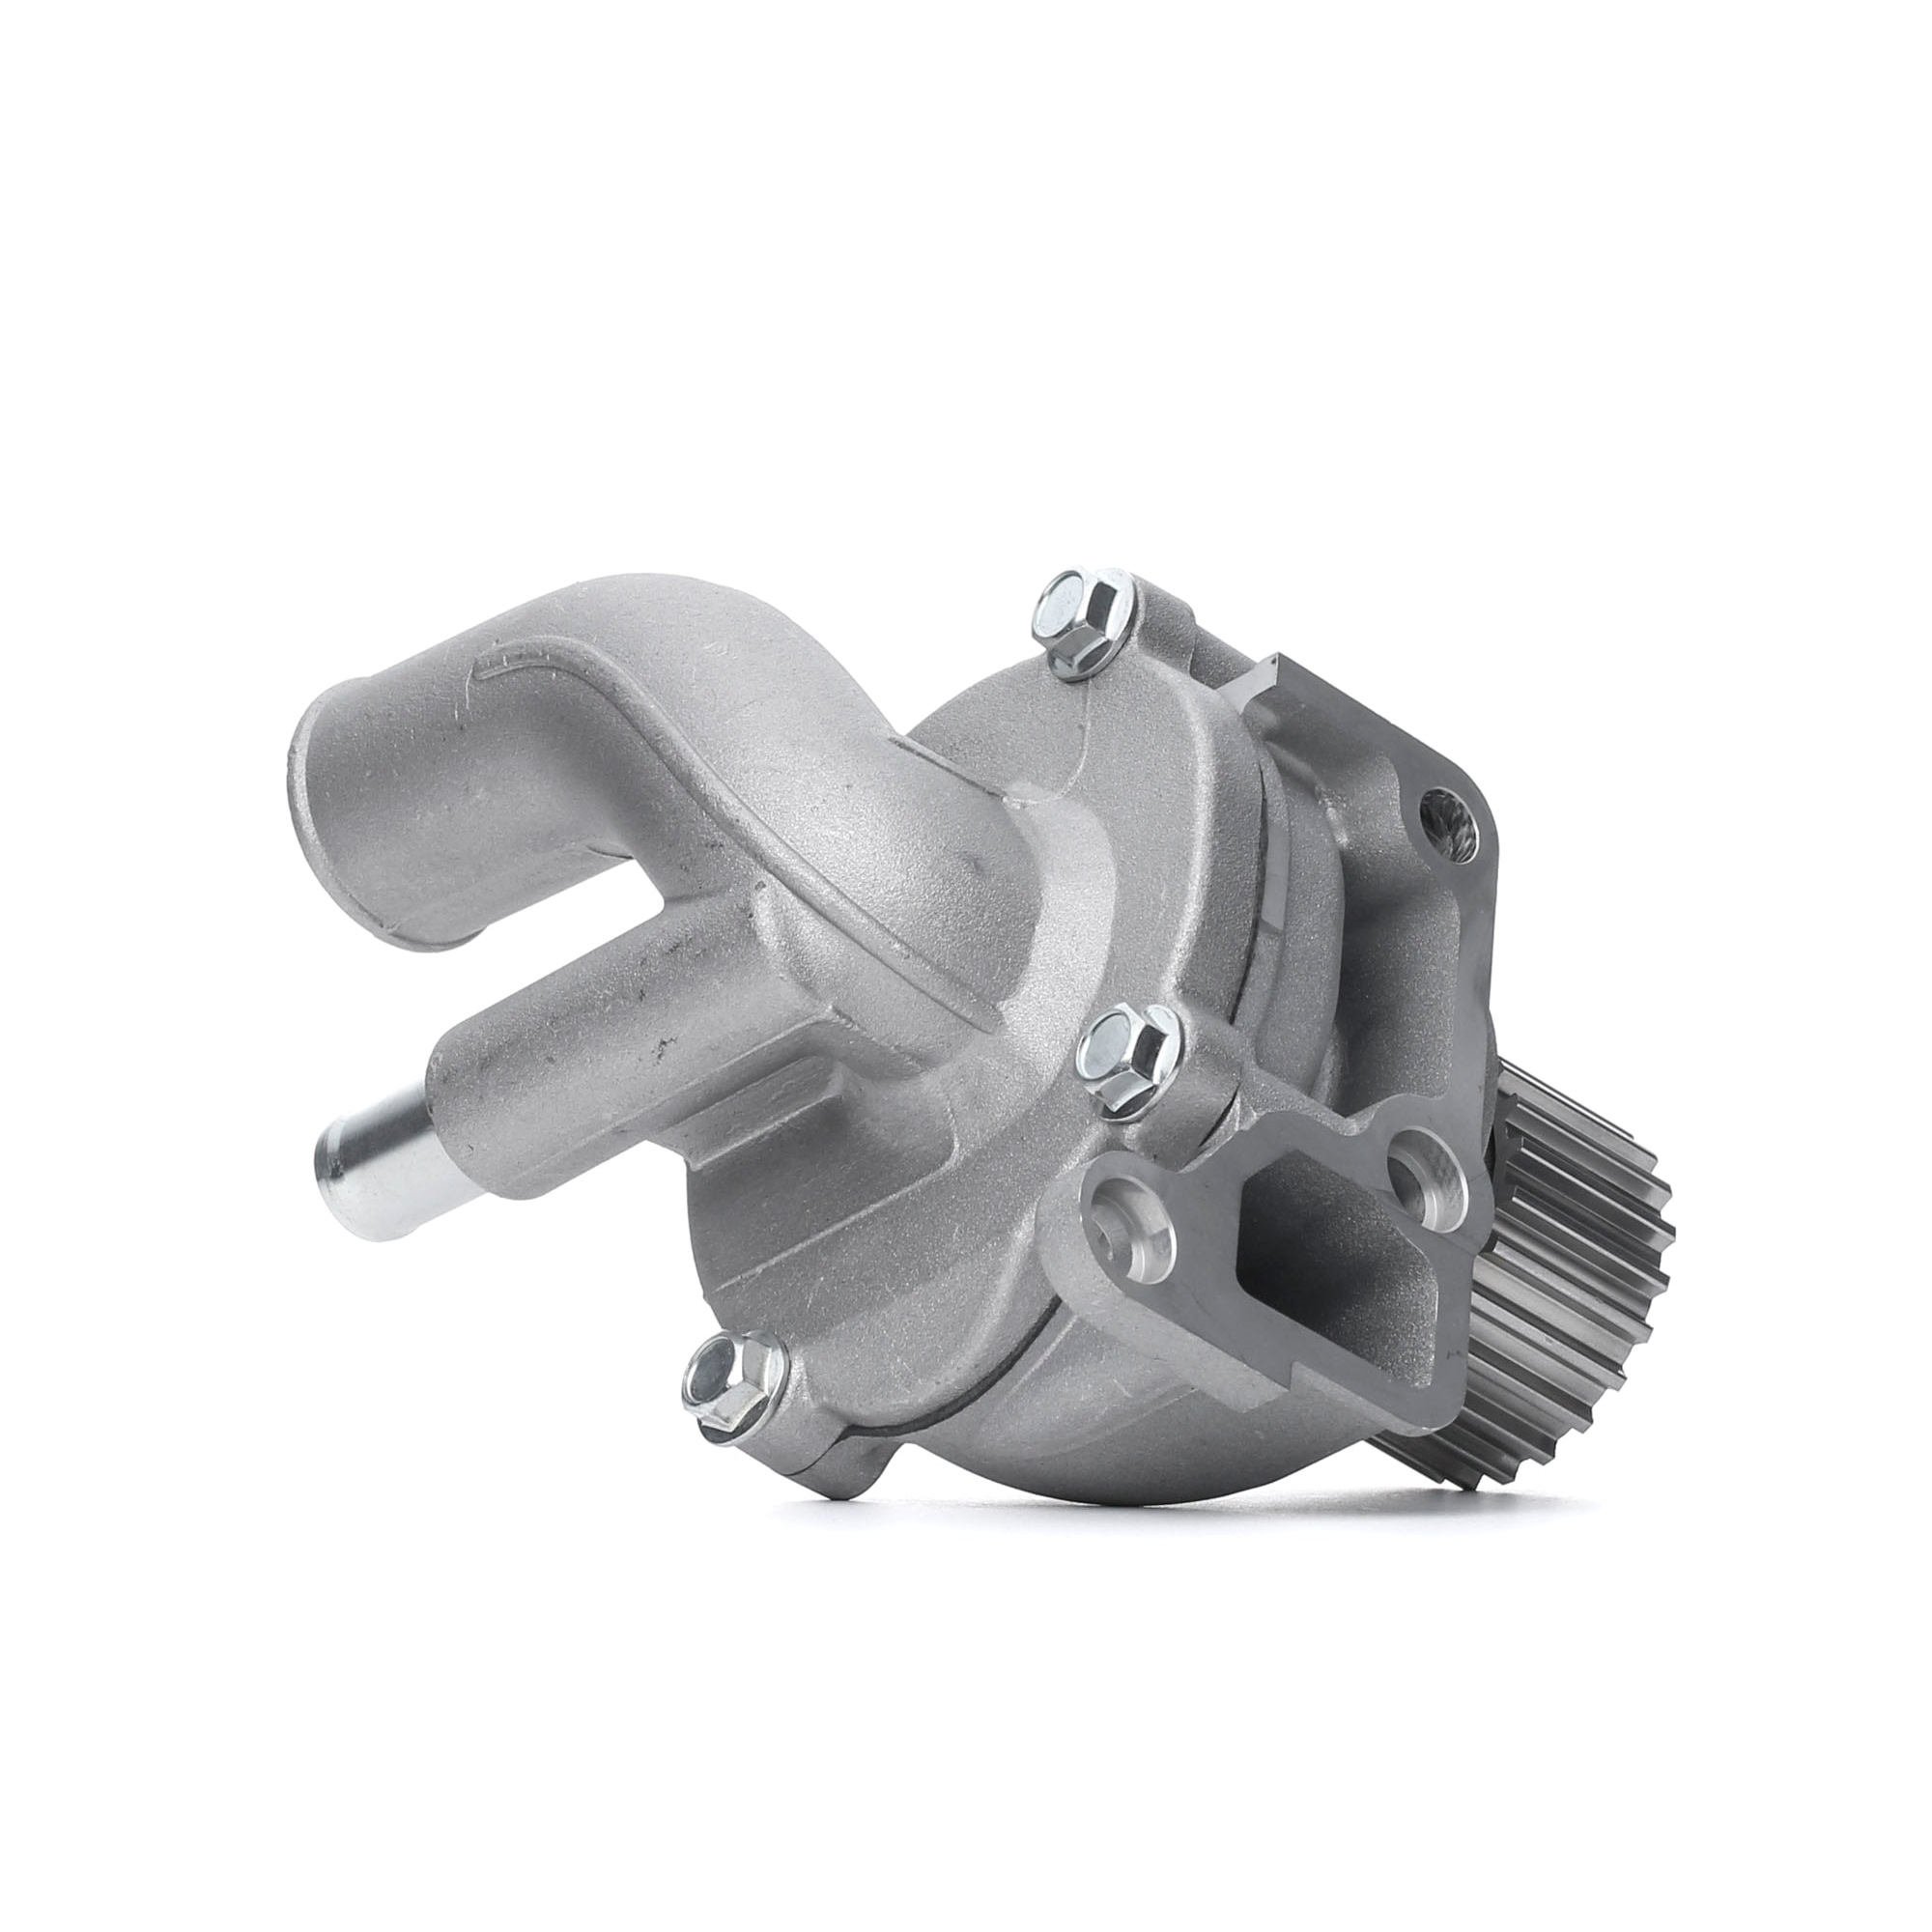 1260W0318 RIDEX Water pumps SUZUKI Number of Teeth: 22, Cast Aluminium, with belt pulley, Belt Pulley pressed on, Mechanical, for timing belt drive